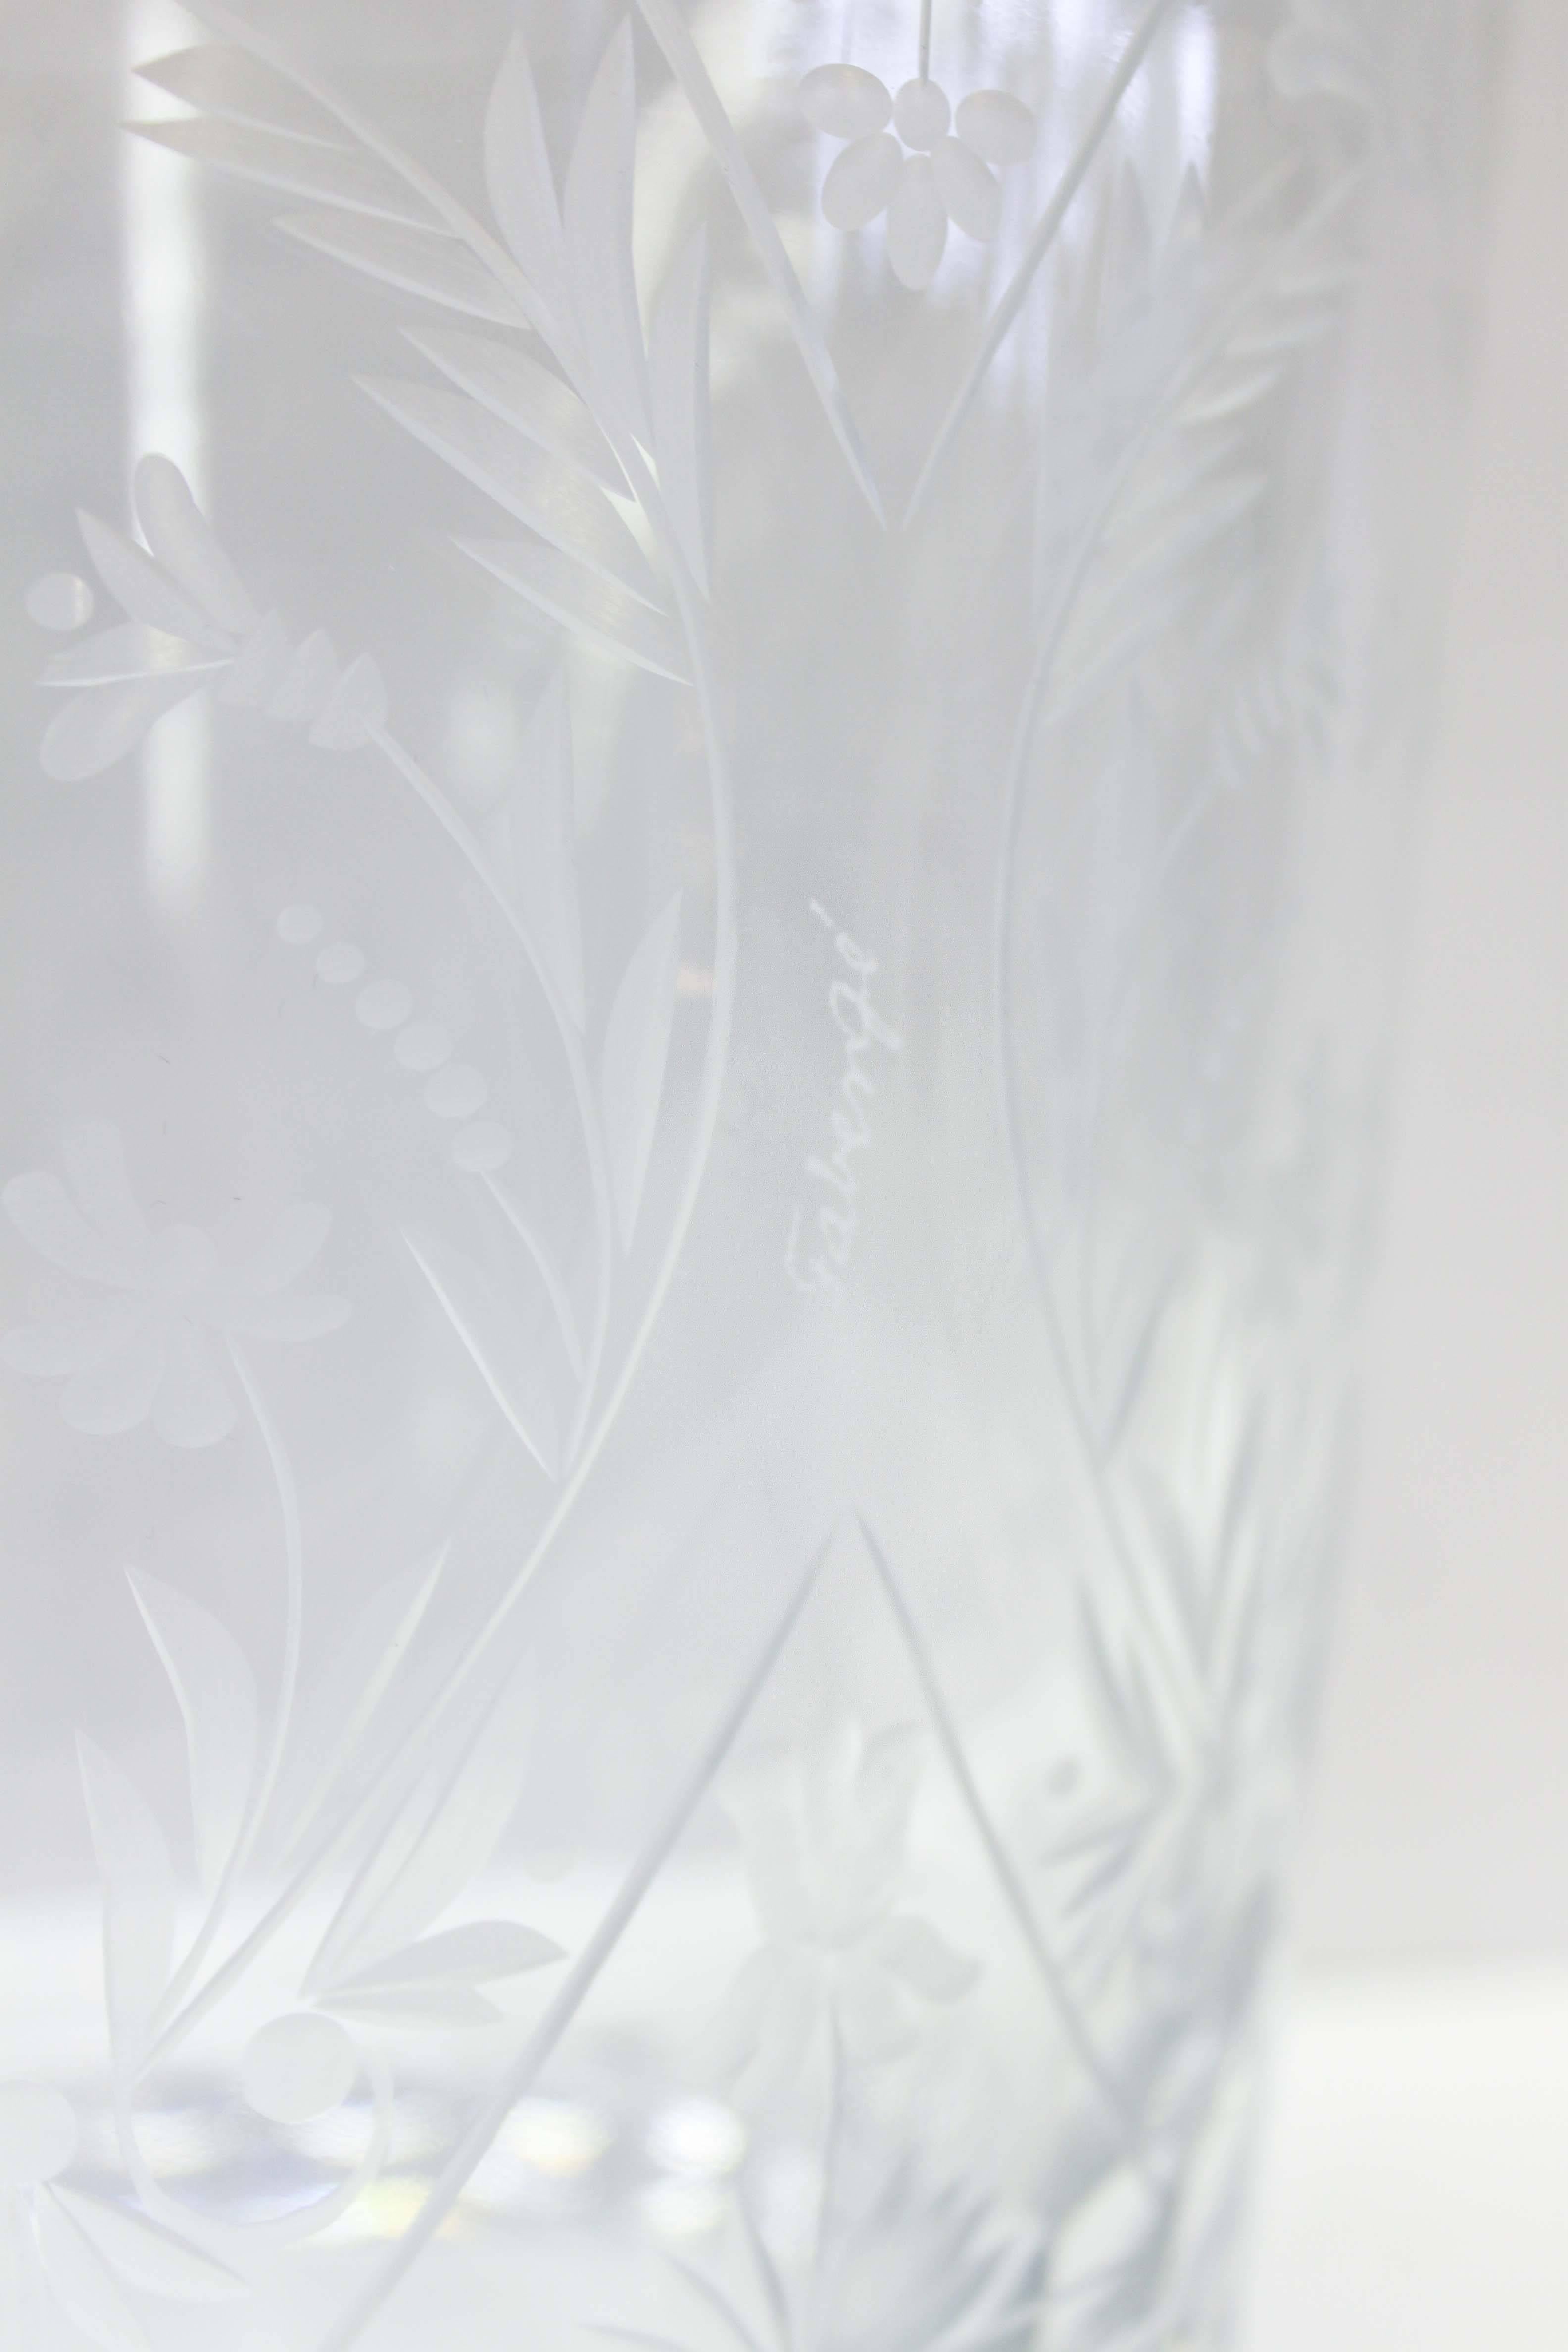 Contemporary Fabergé Crystal Vase, Signed